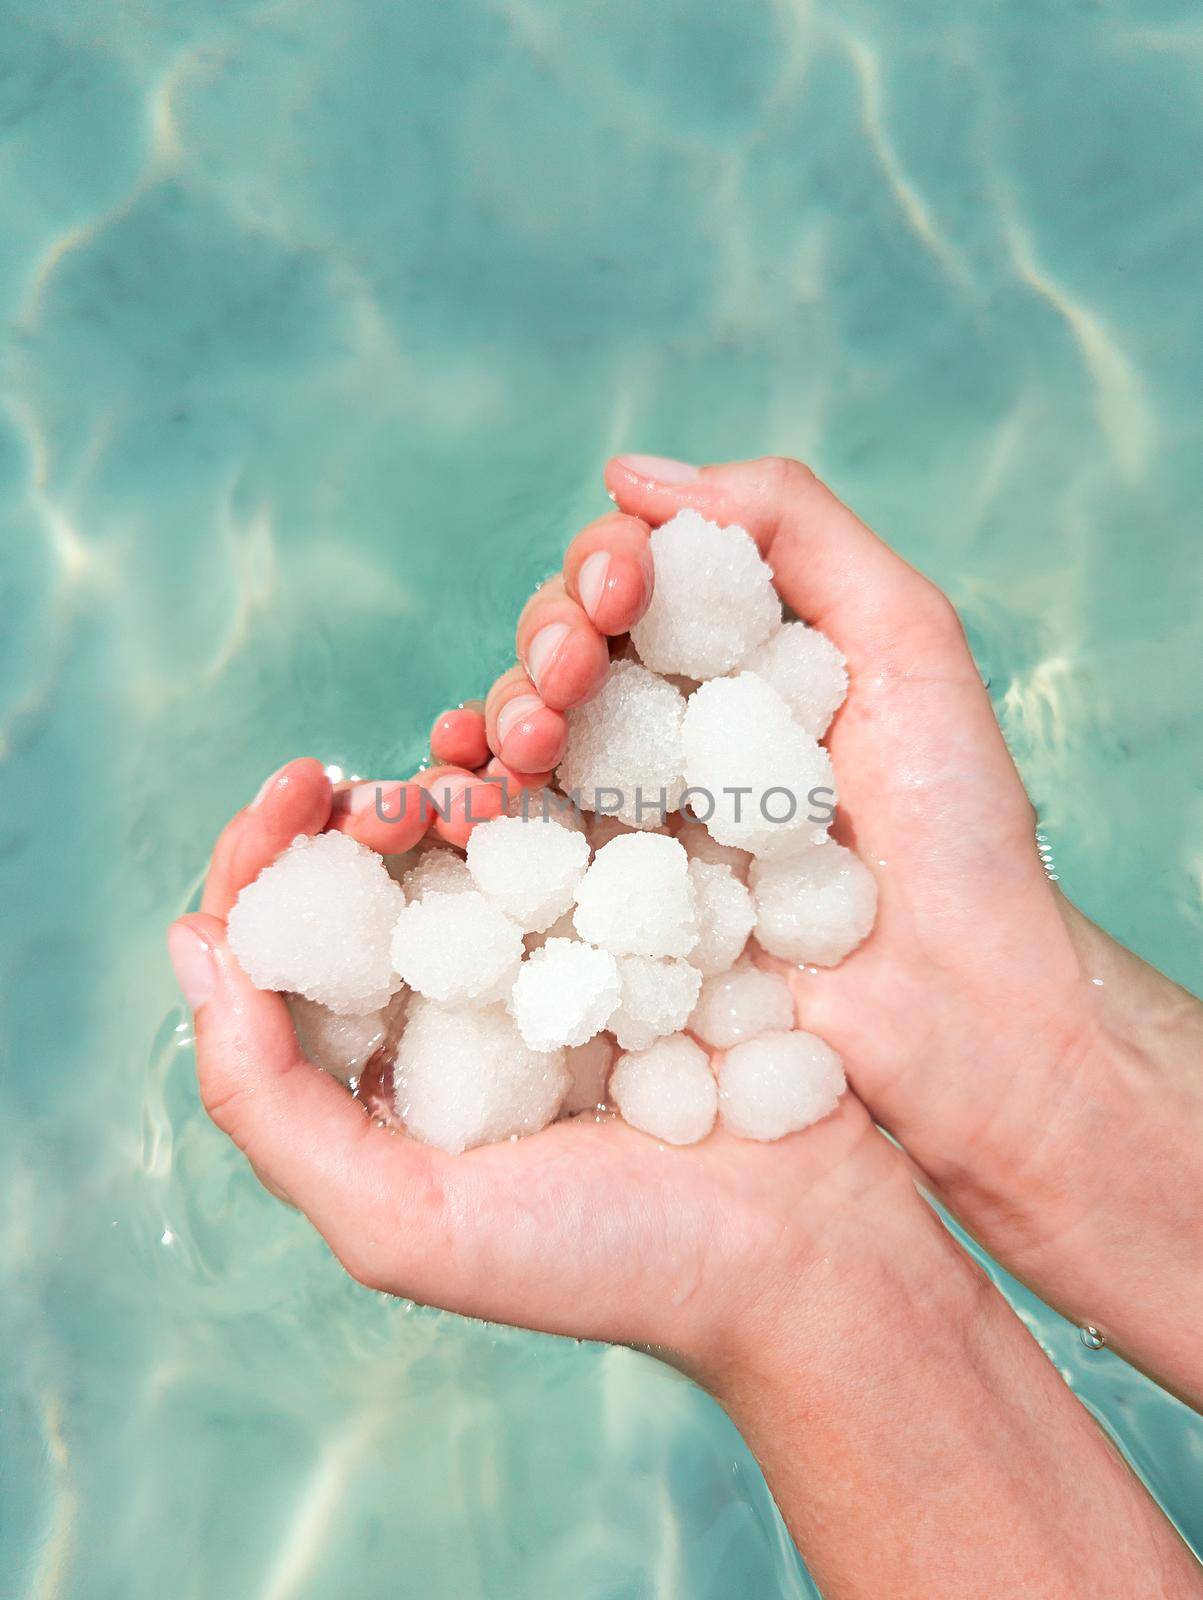 Hands holding sea salt crystals heart-saped on sea water background by Len44ik